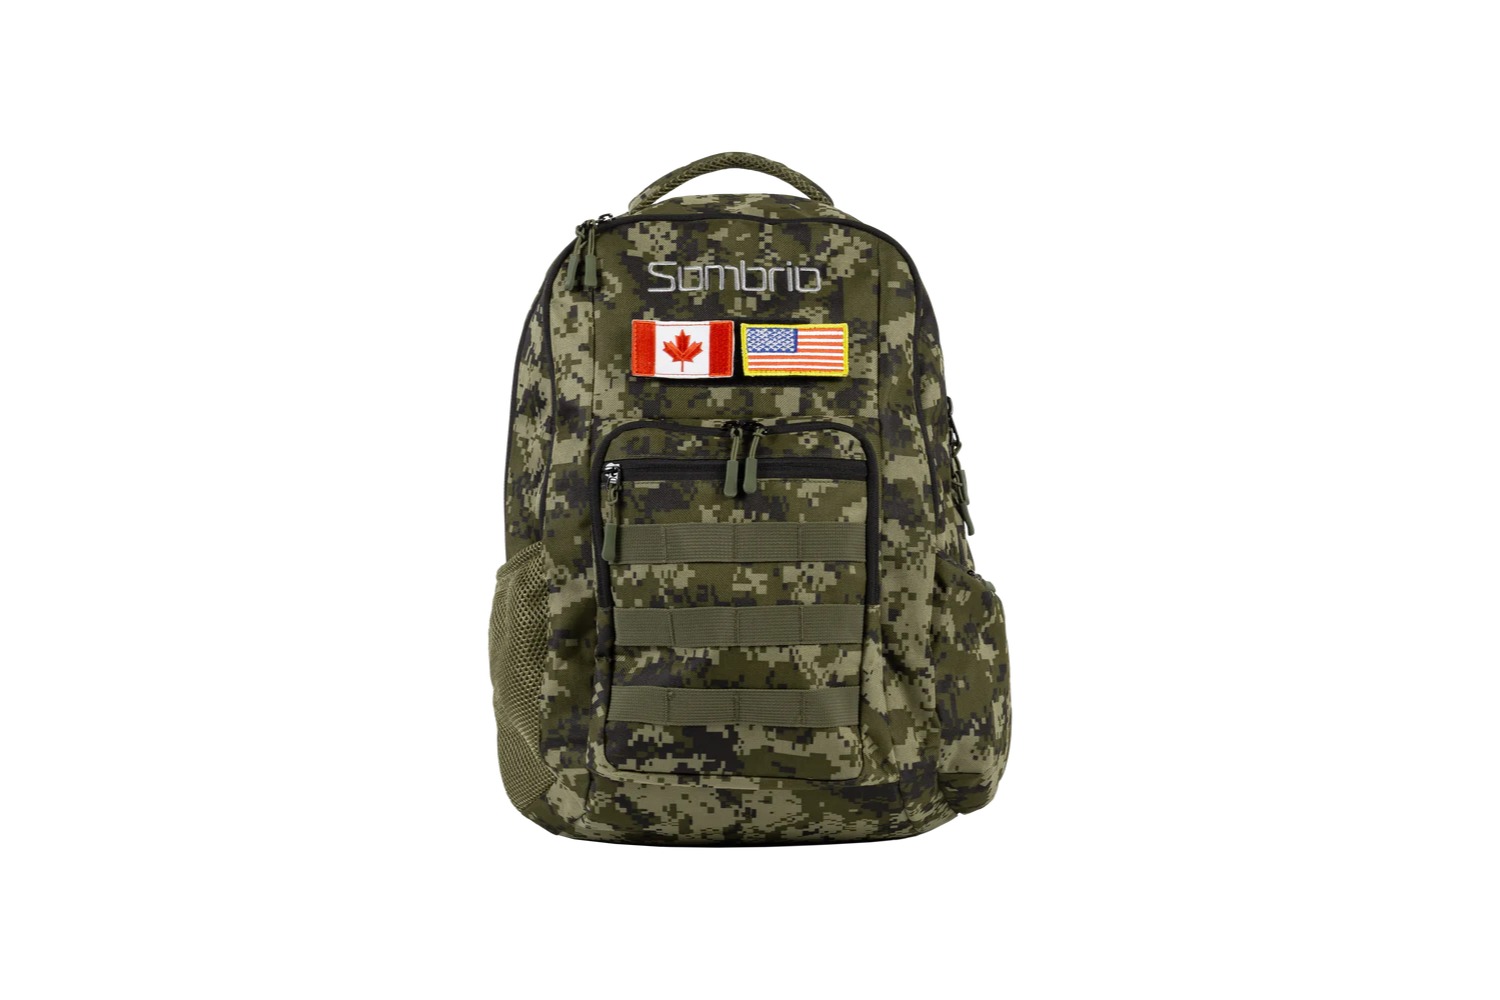 Sombrio Backpack Cueva-25 Bag Camouflage 25Litres